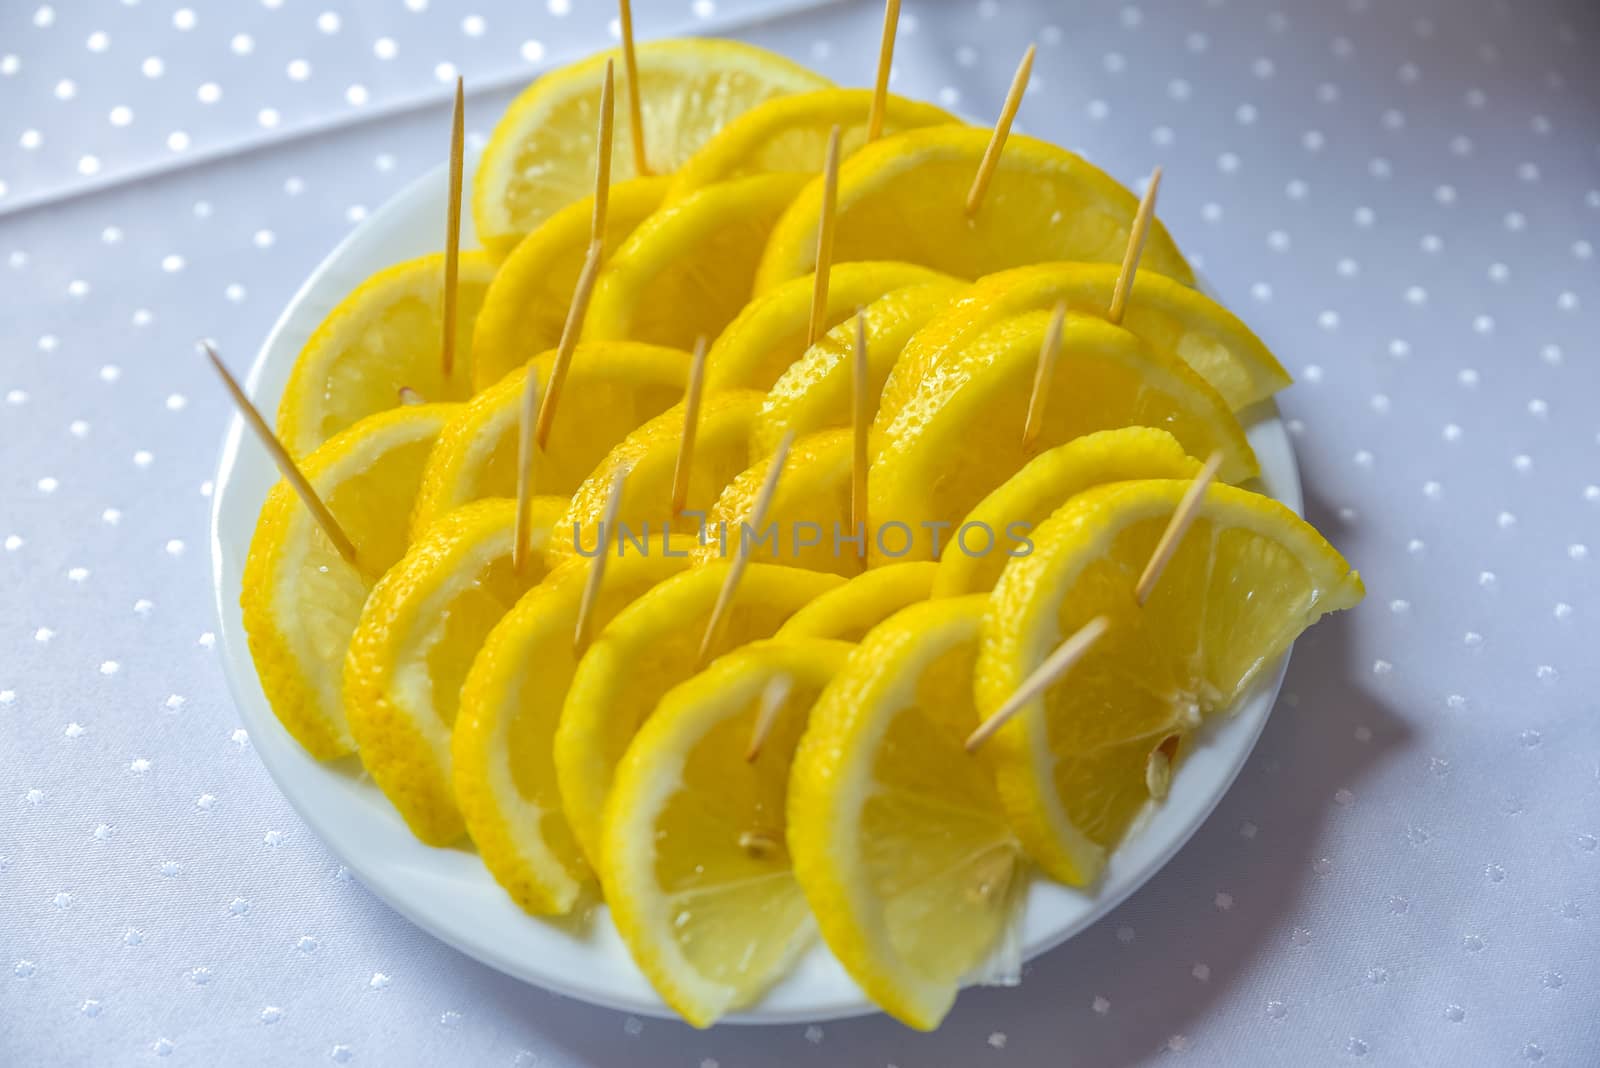 Yellow lemon slice standing on a white plat on blurred table